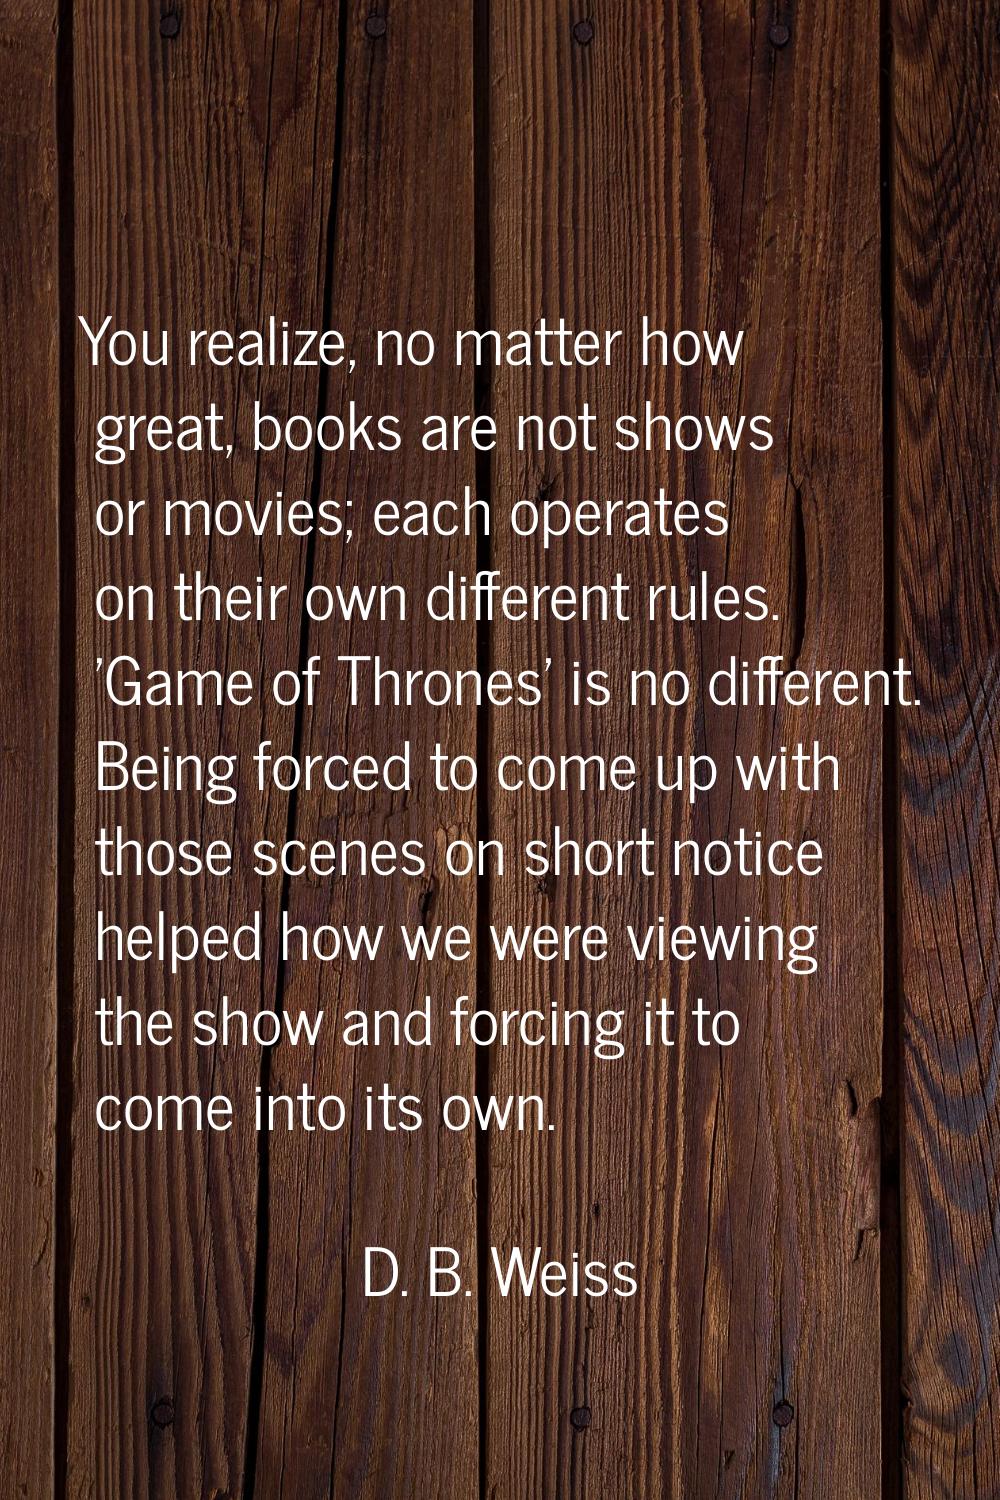 You realize, no matter how great, books are not shows or movies; each operates on their own differe